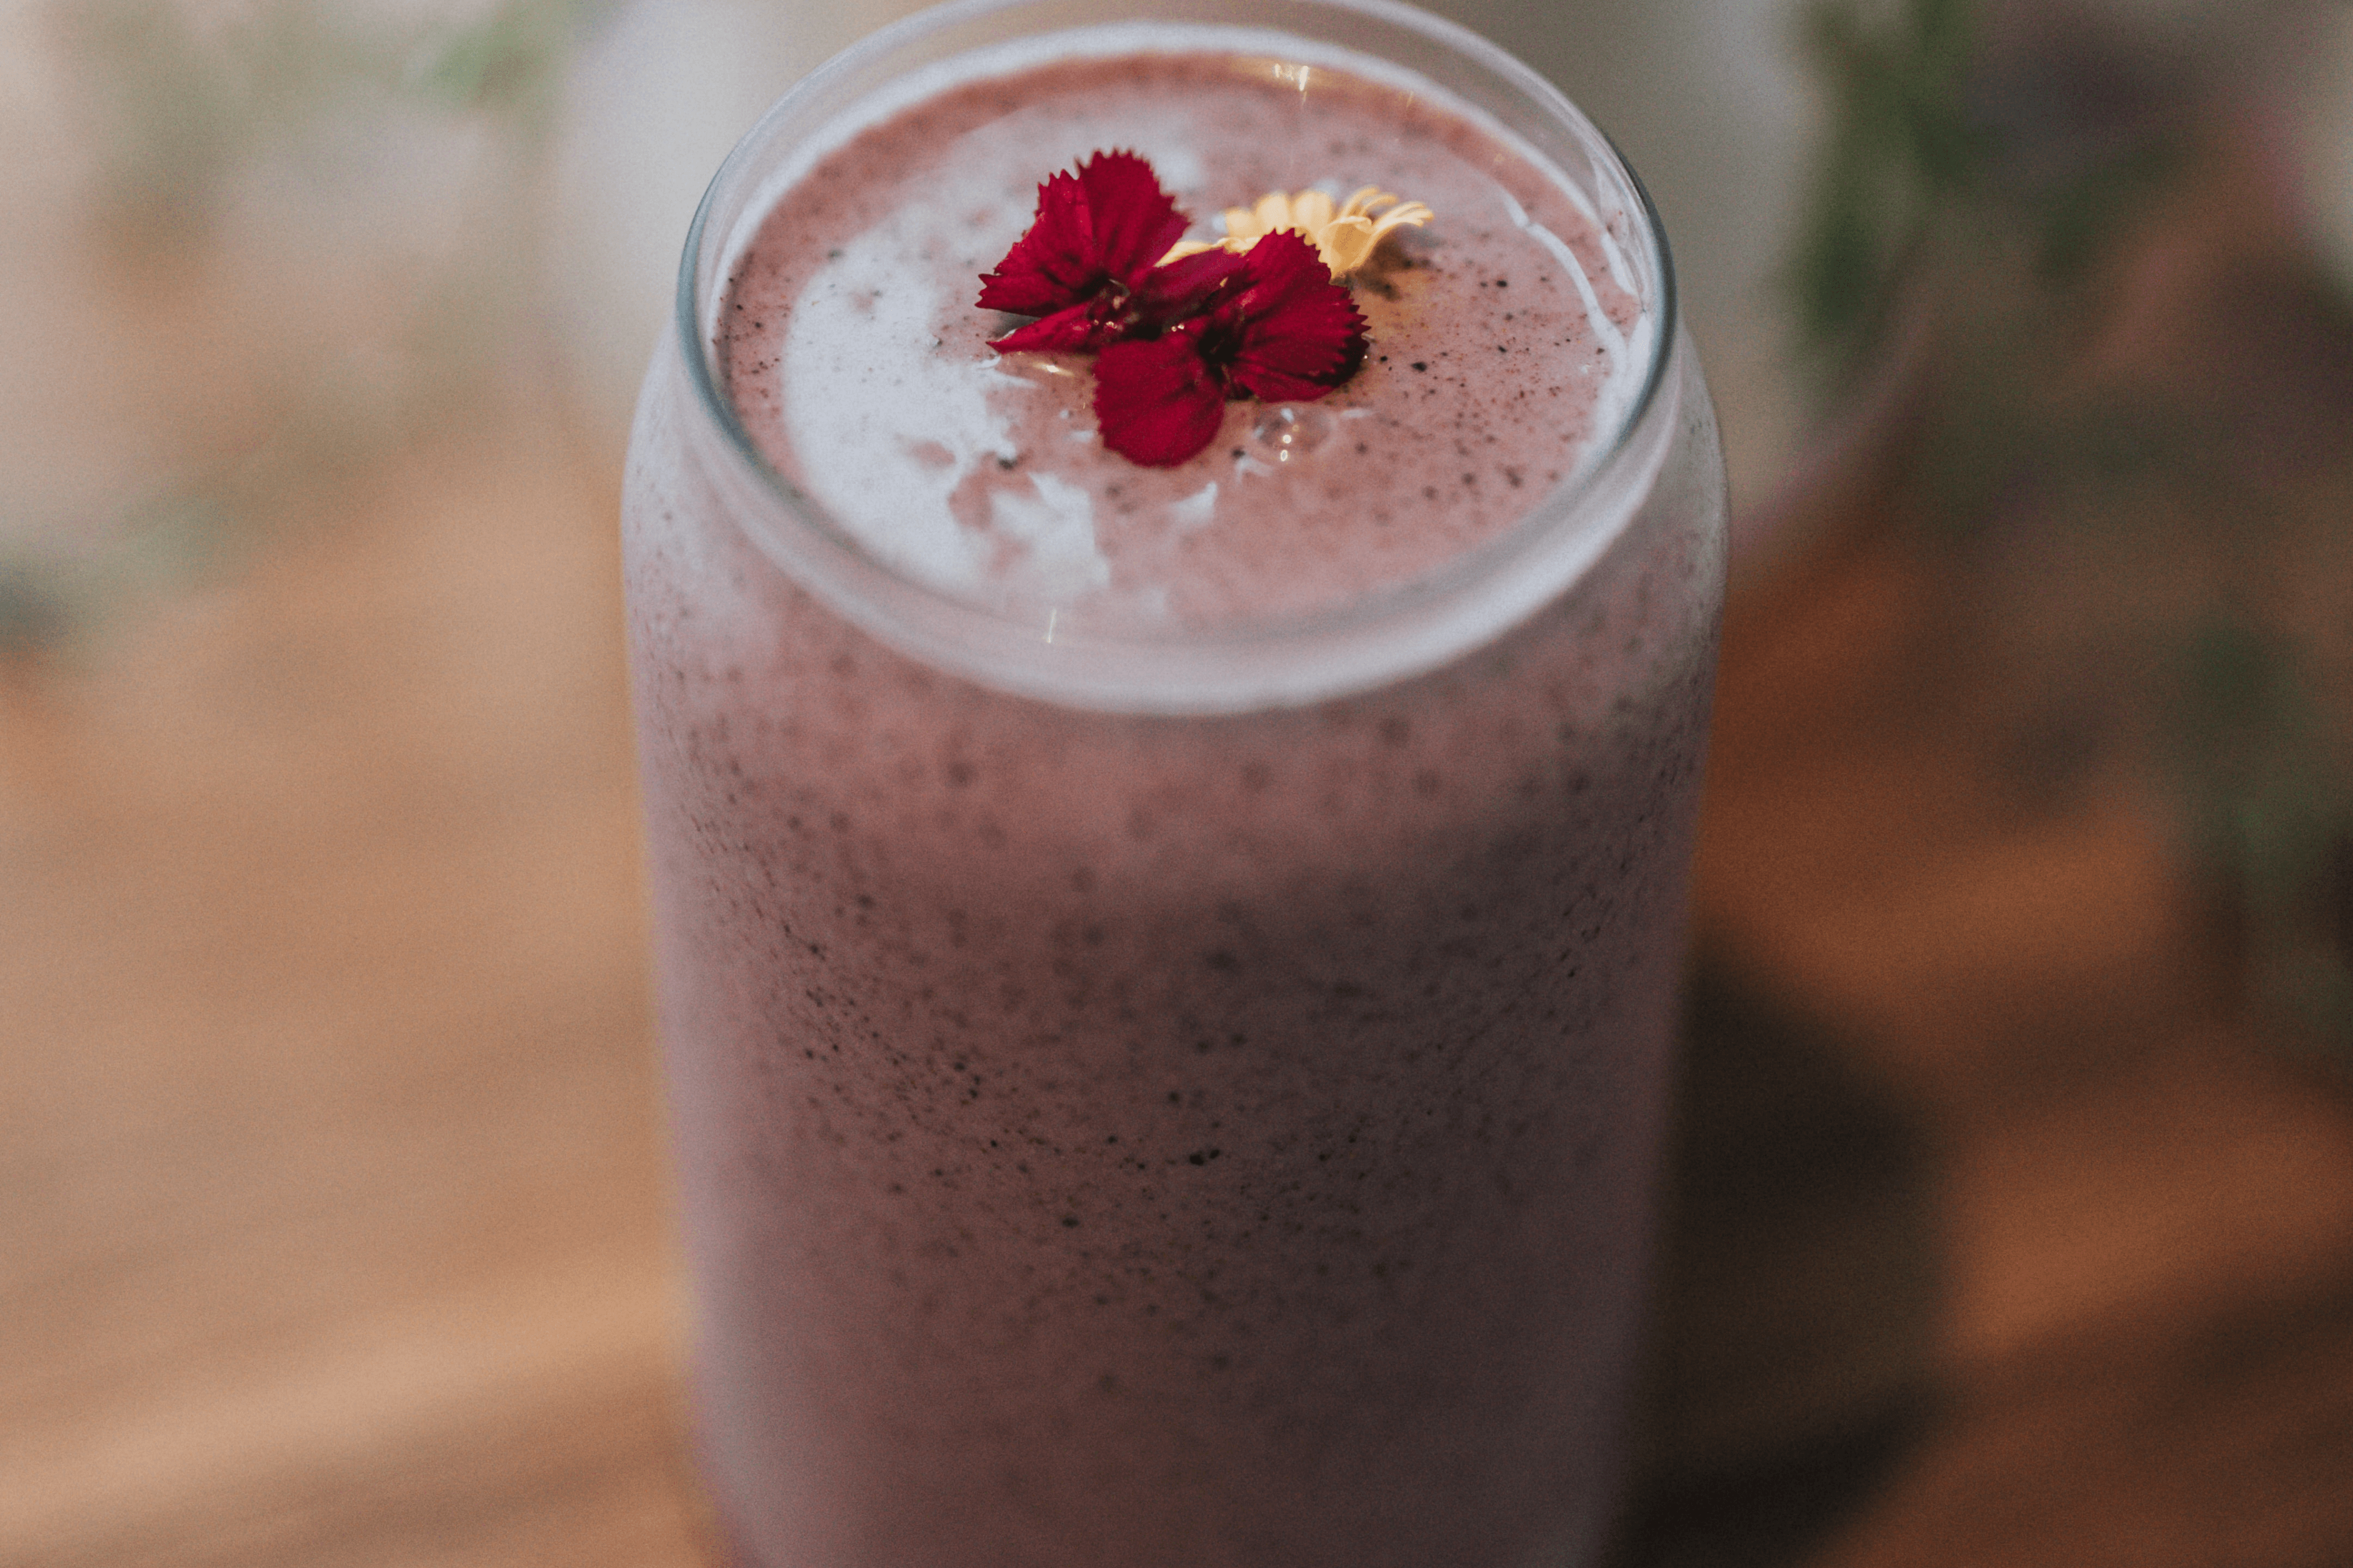 prune juice smoothie for constipation